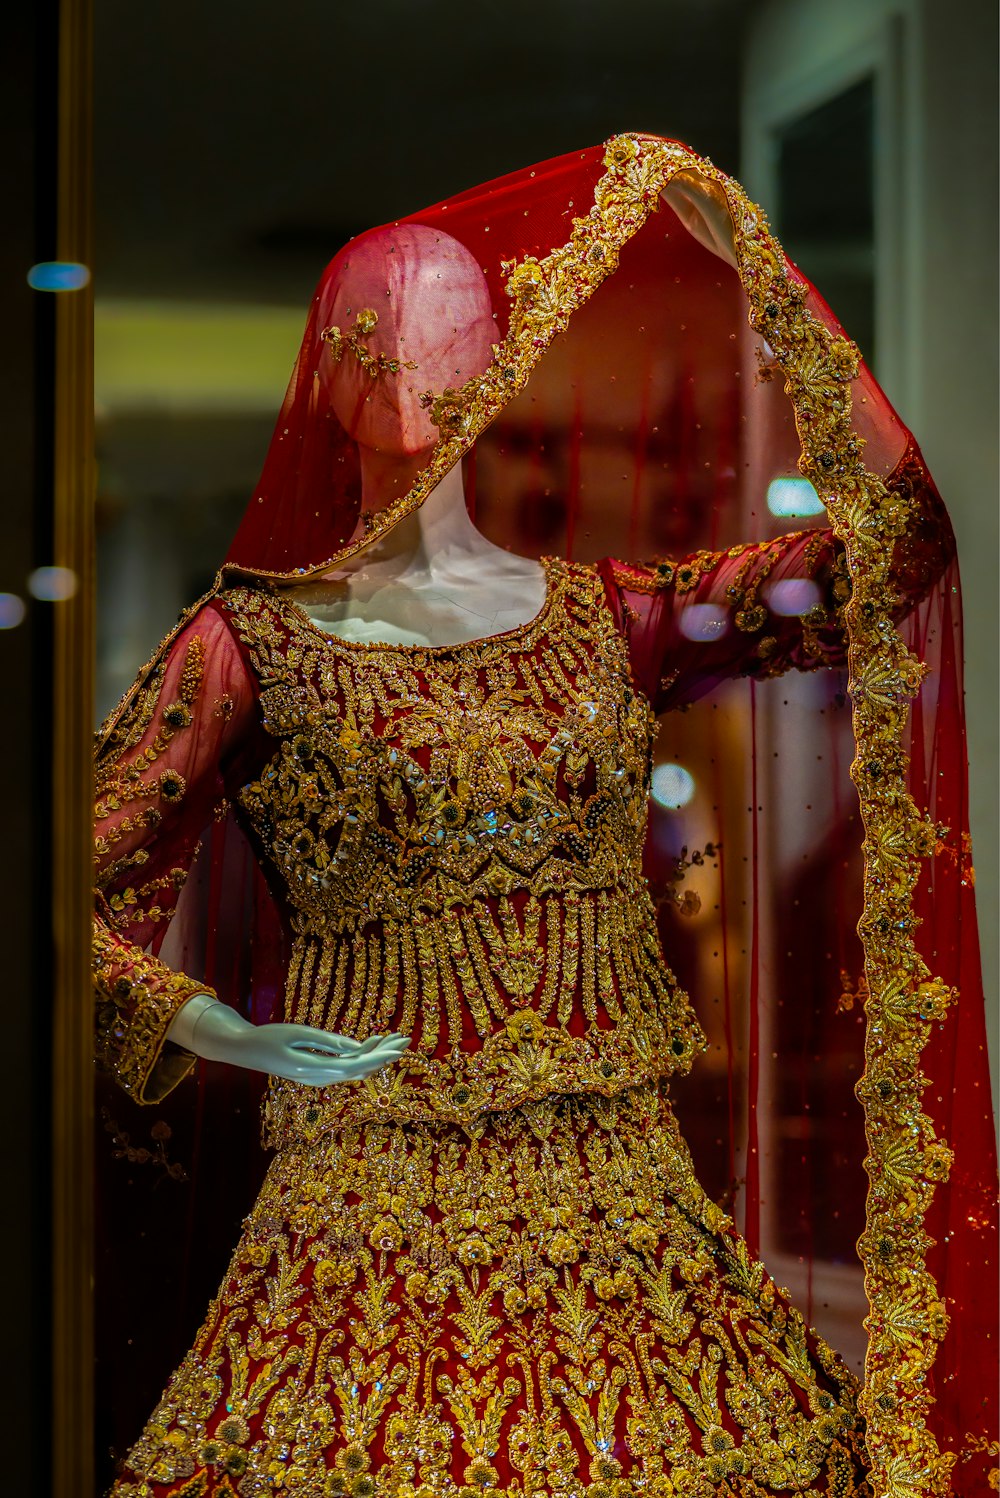 a mannequin dressed in a red and gold outfit